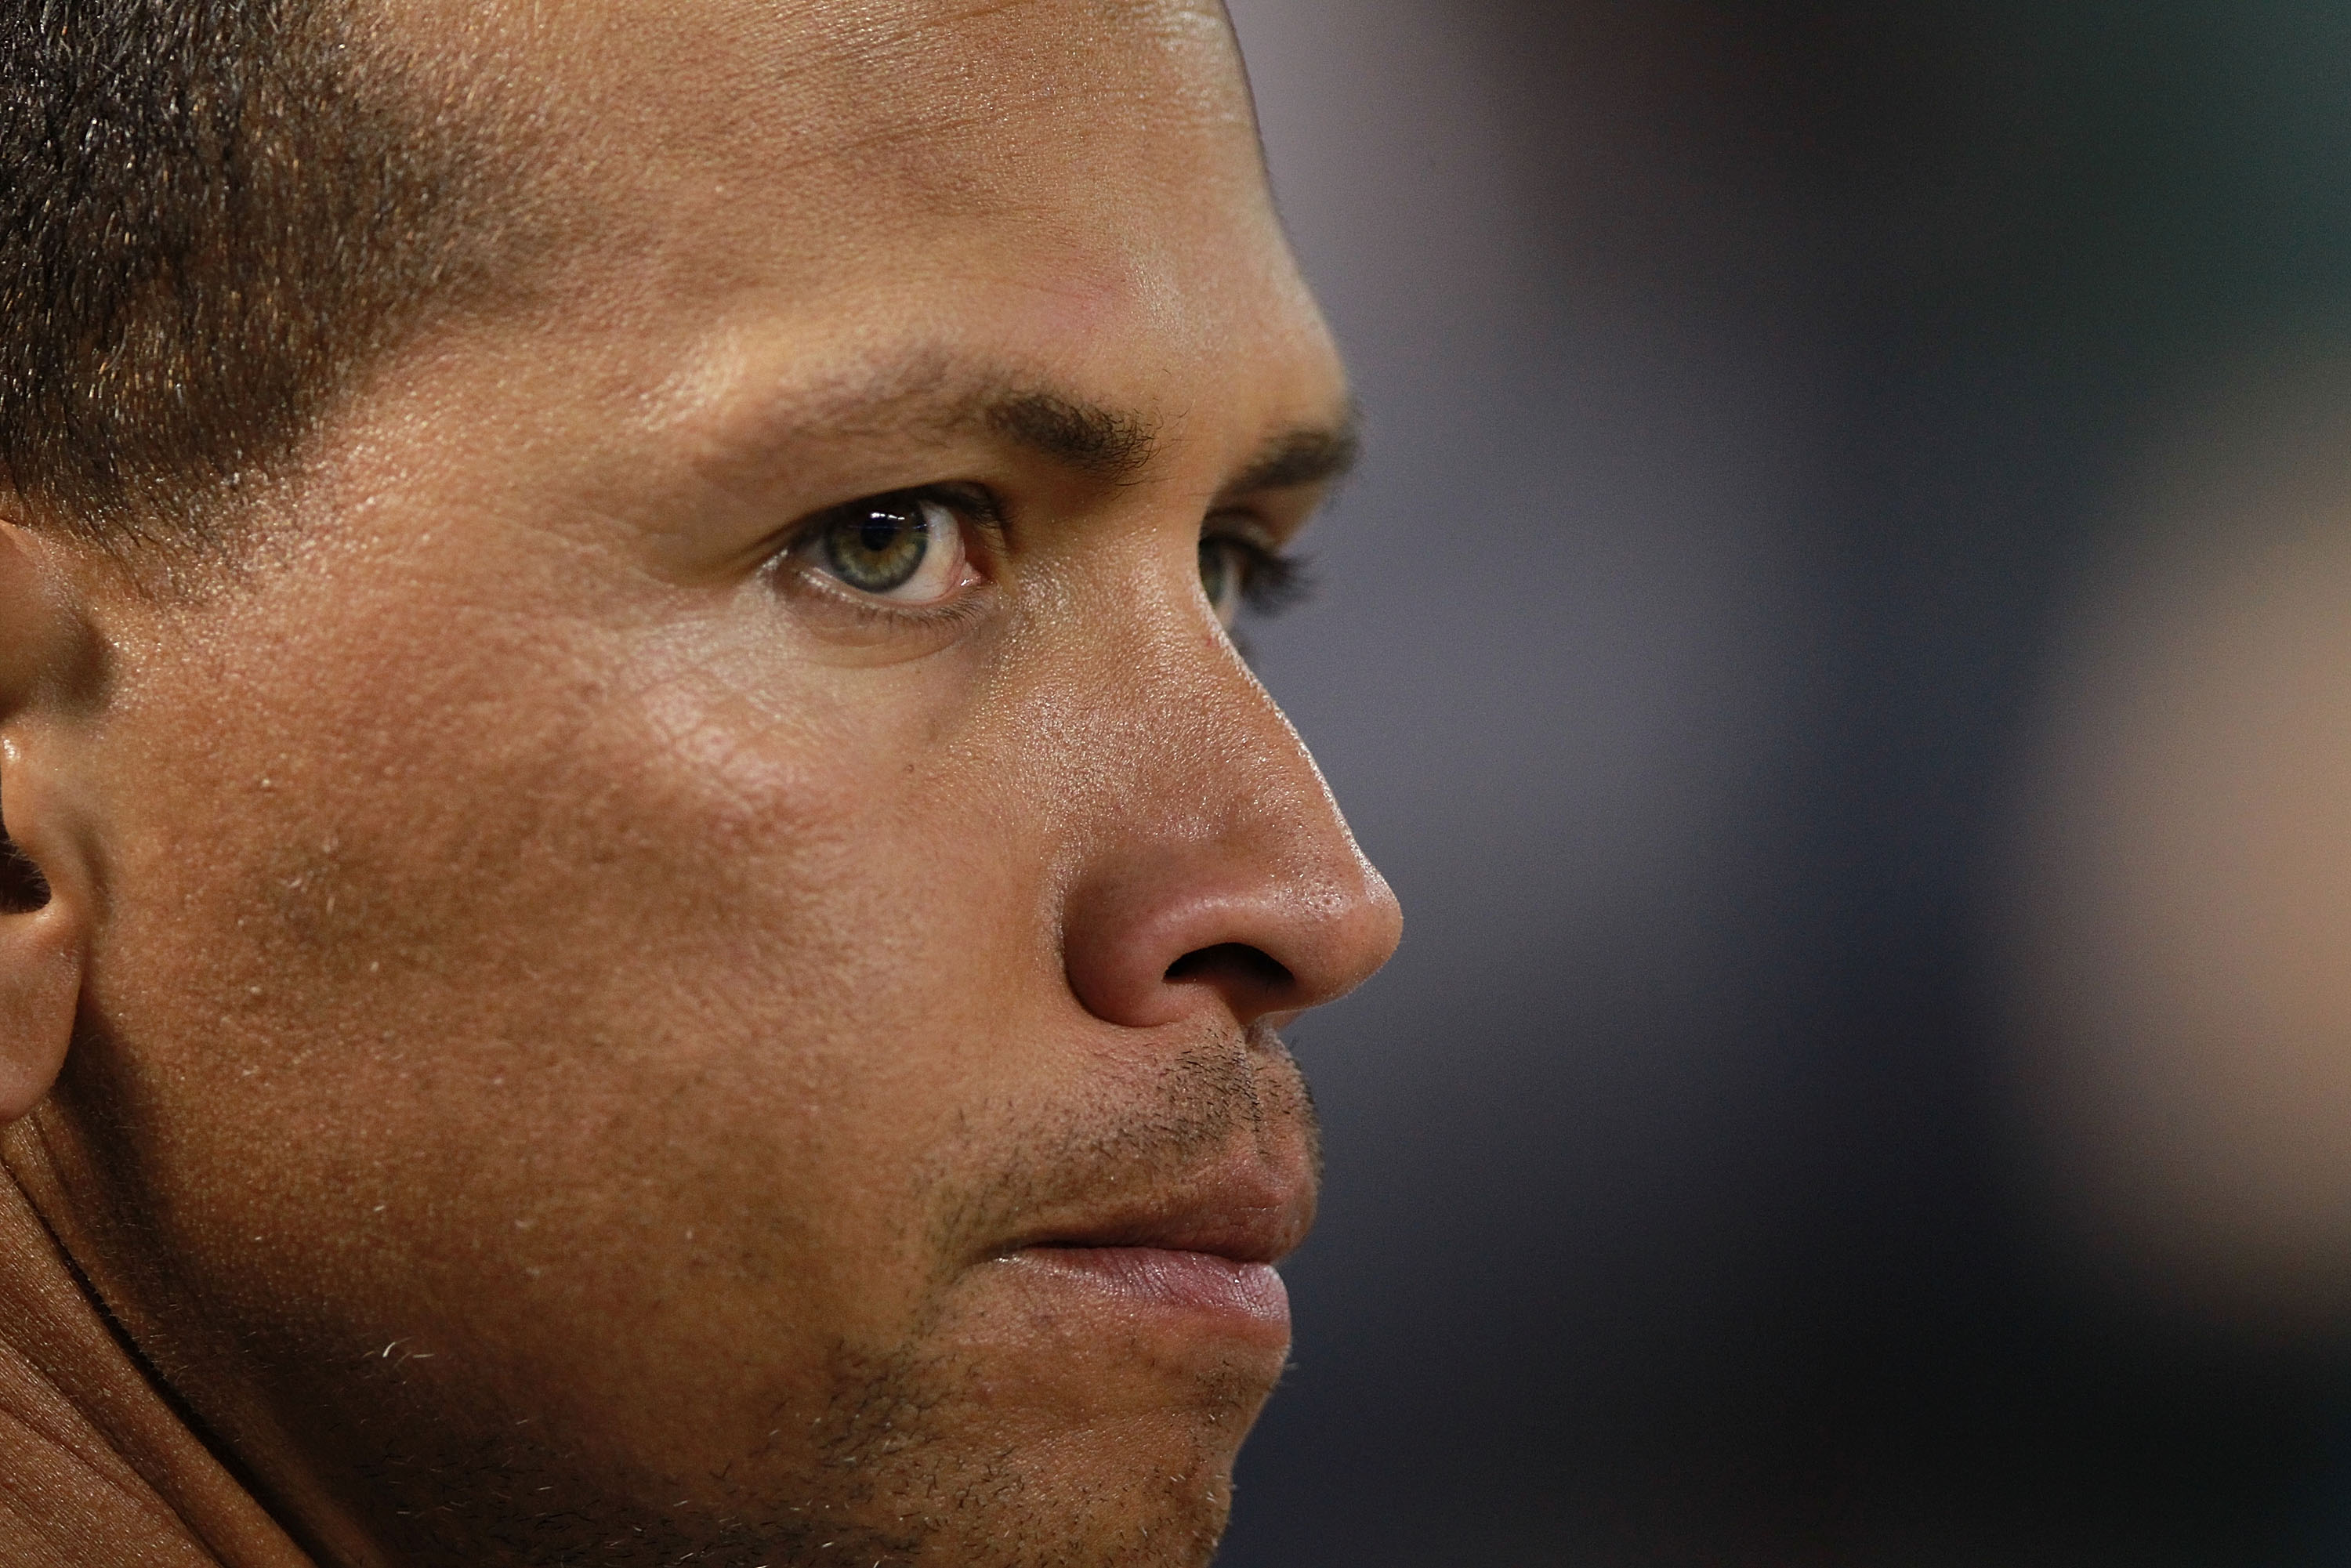 A-Rod apologizes to Yankees